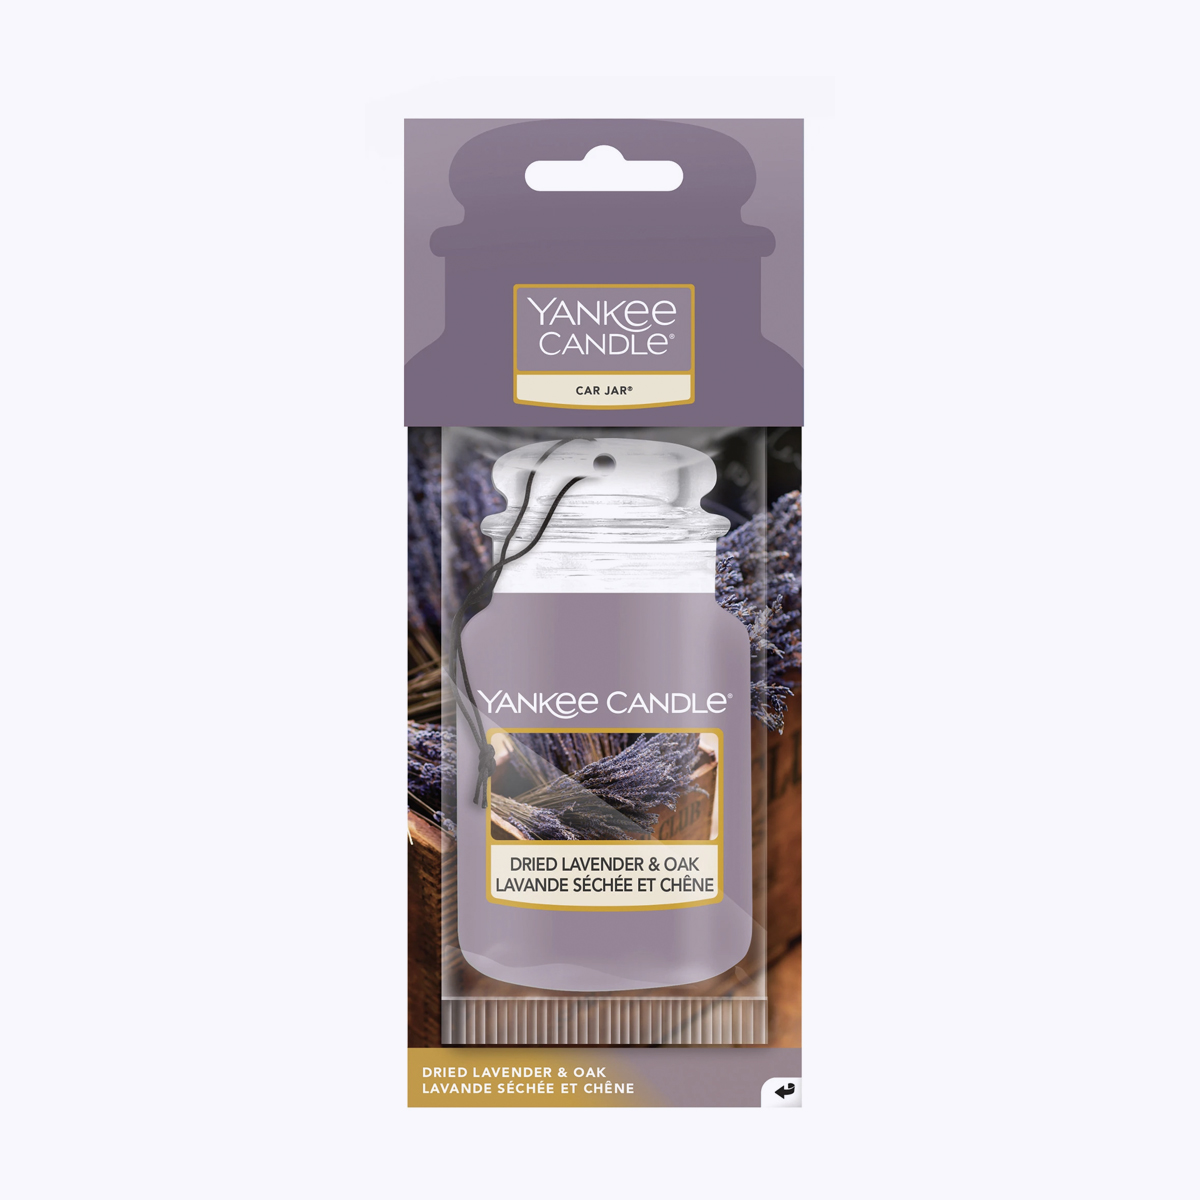 car jar voiture dried lavender and oak yankee candle